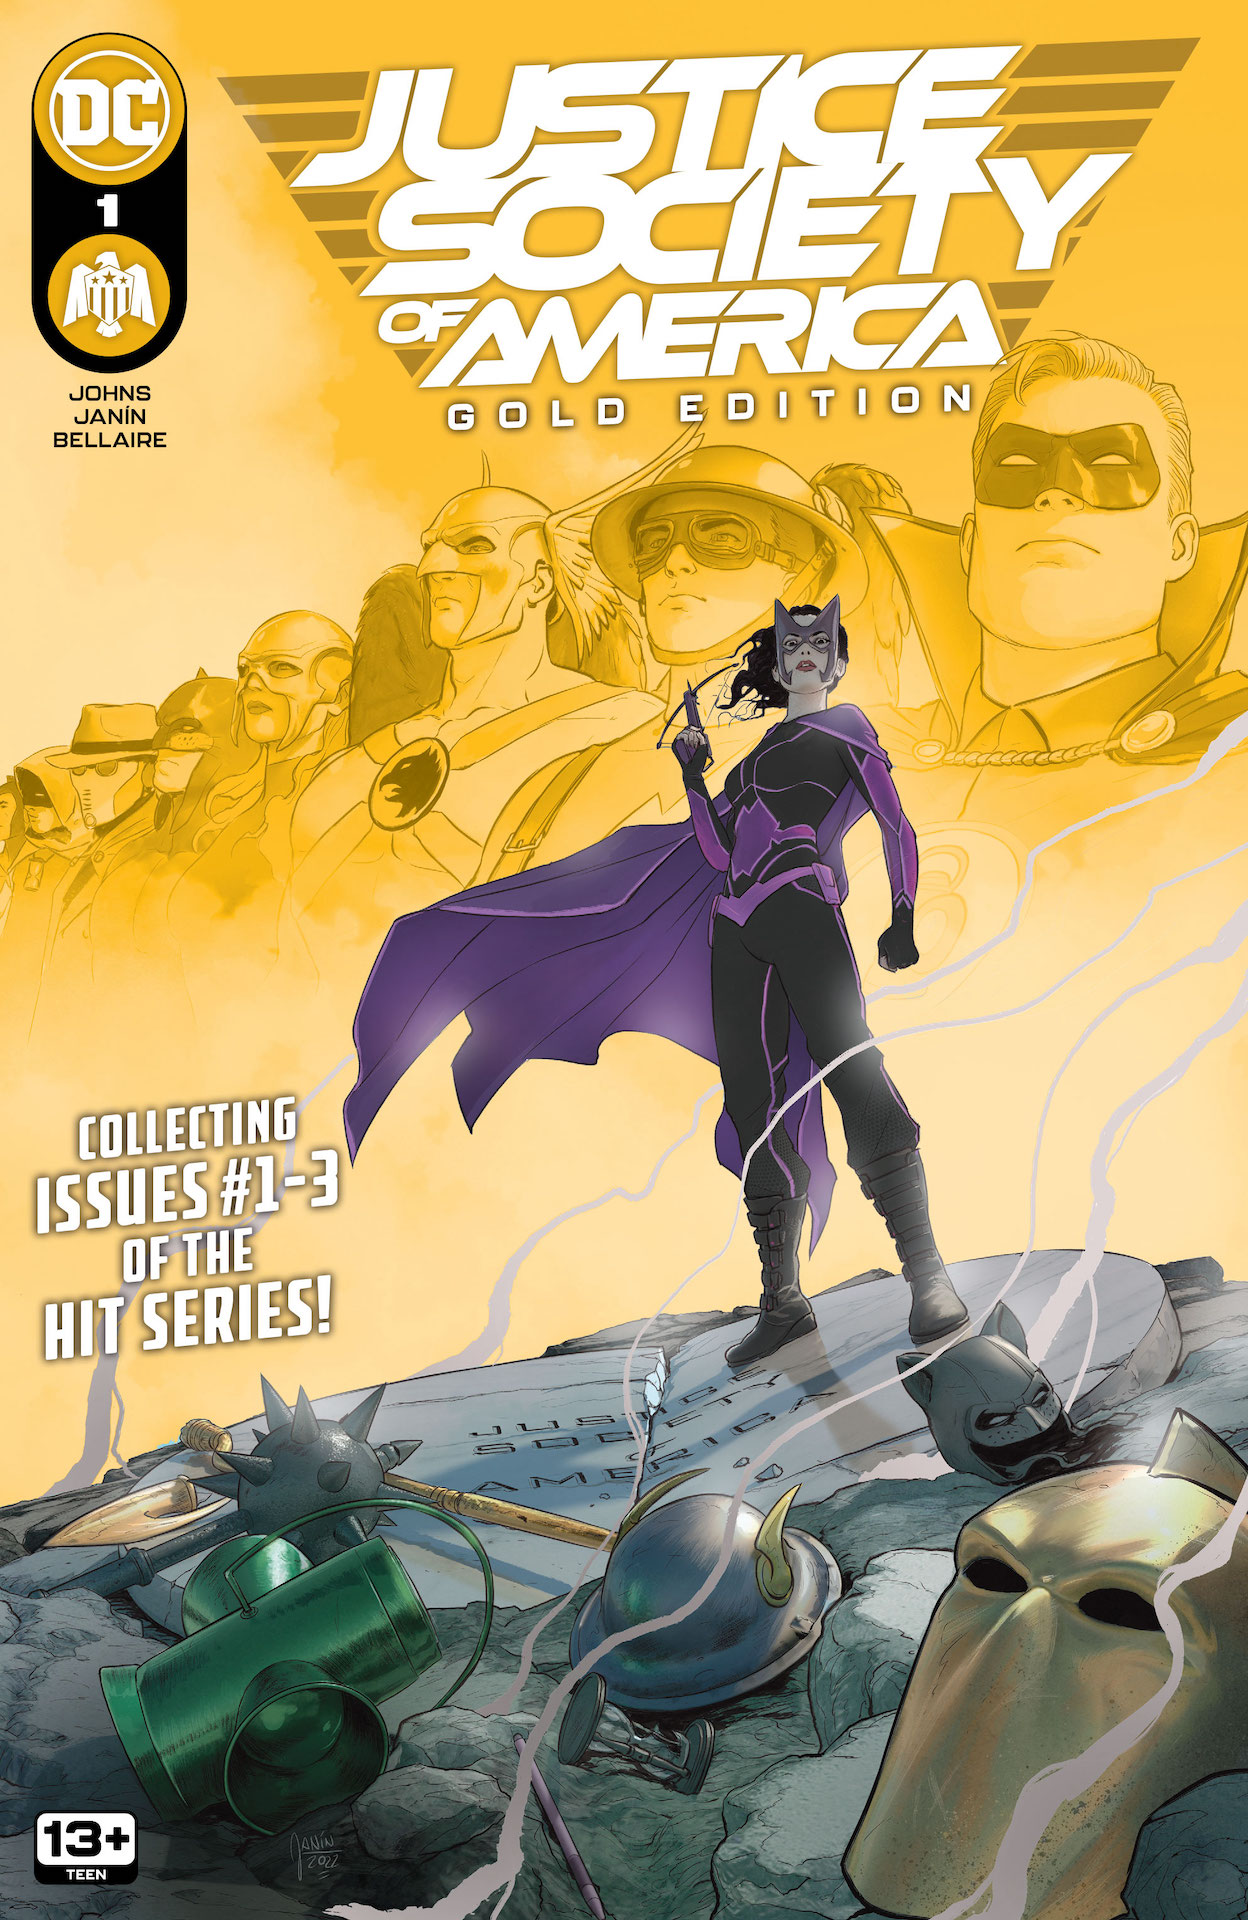 DC Preview: The New Golden Age: Special Edition #1